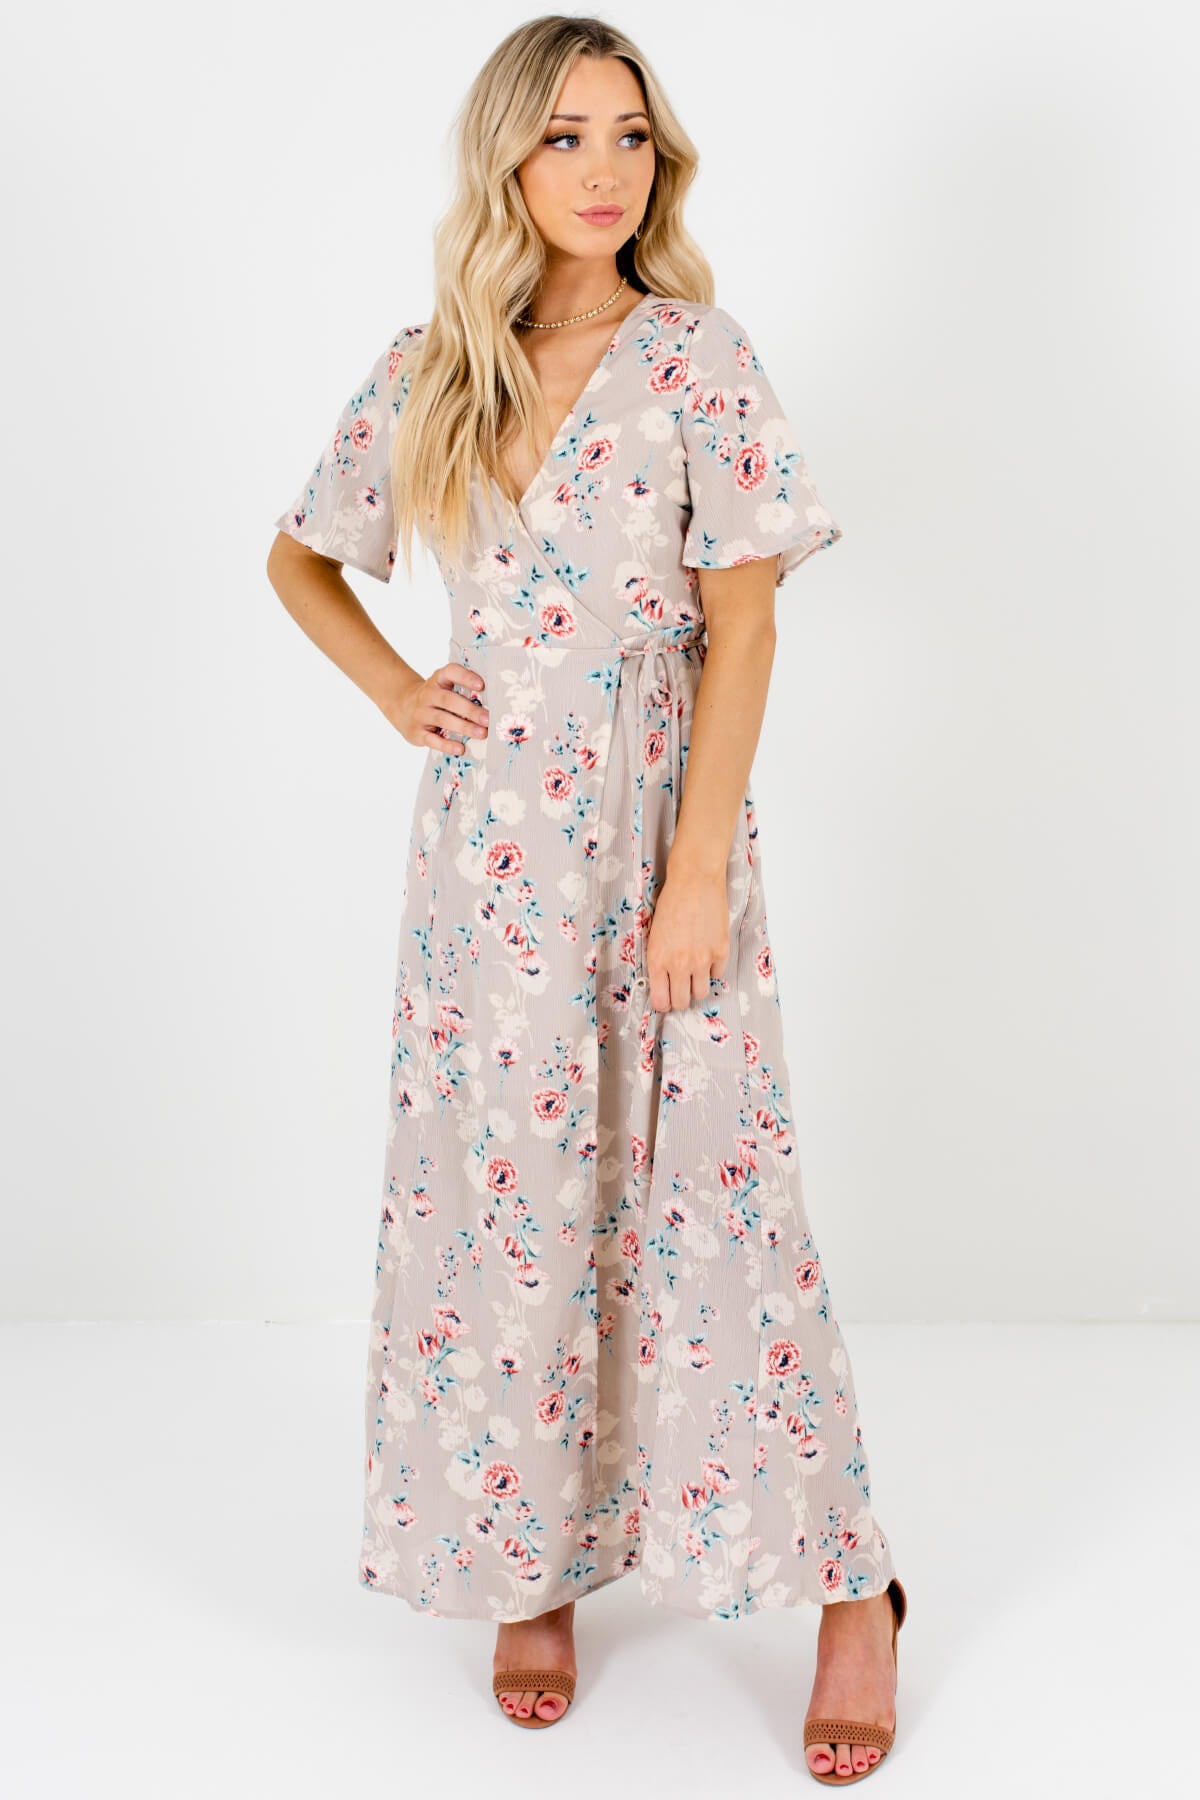 Lush Floral Dress Online Store, UP TO ...